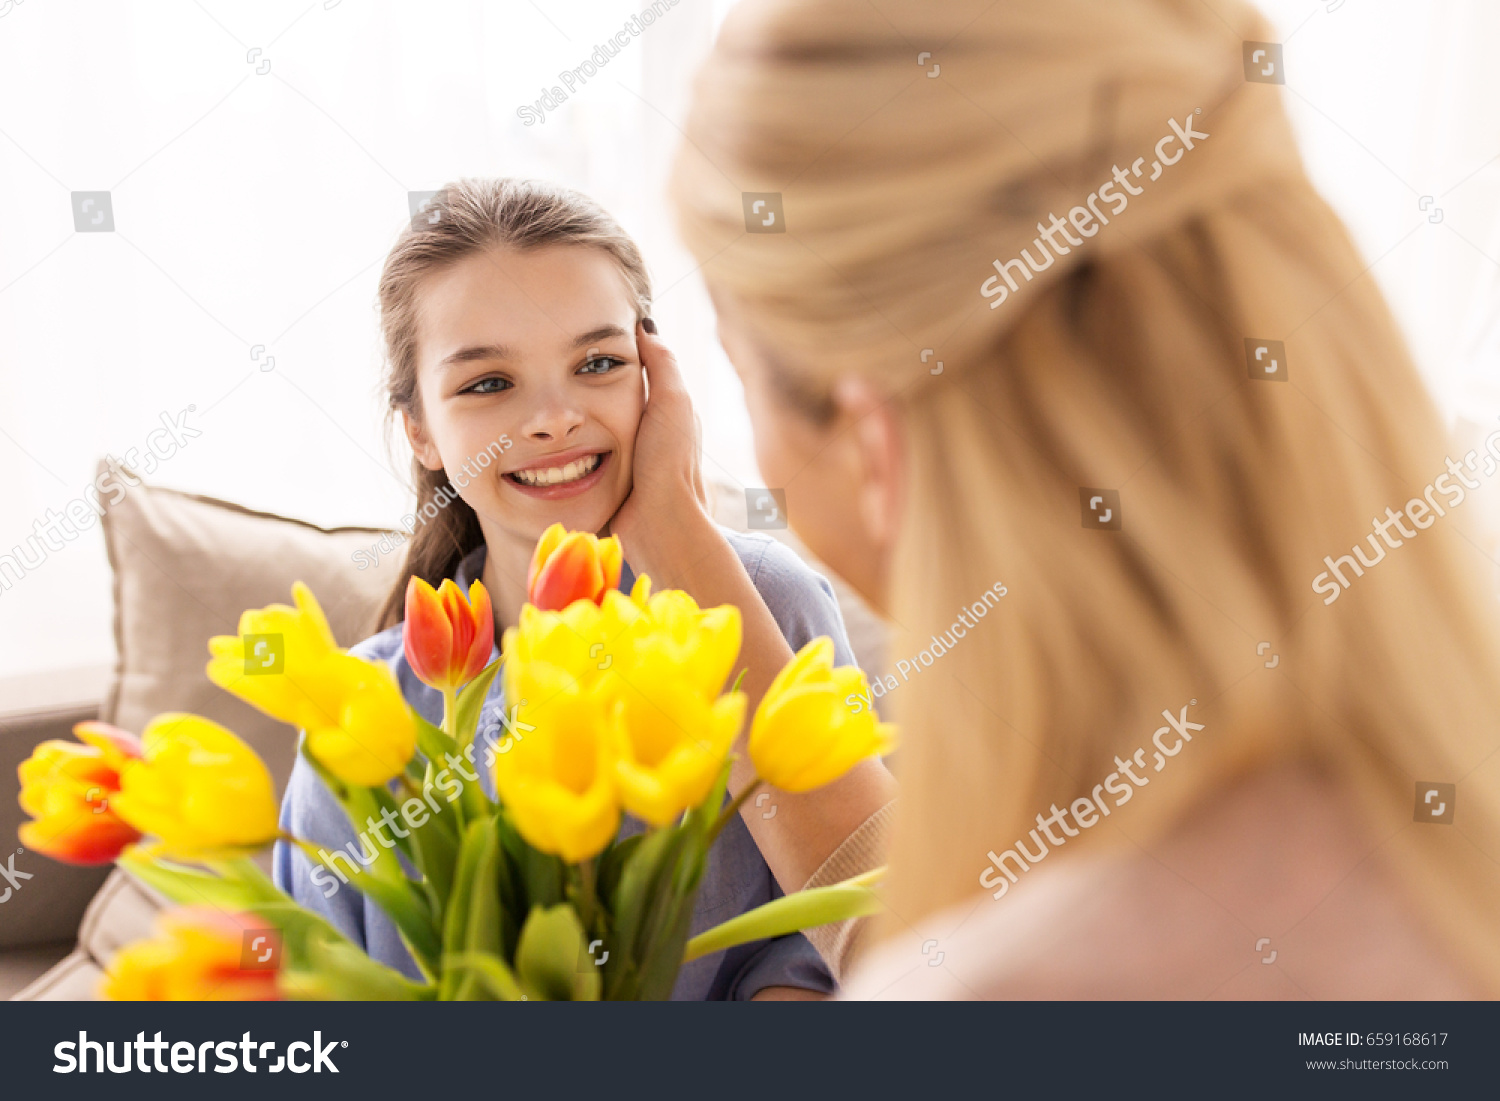 people, family and holidays concept - happy girl giving tulip flowers to her mother at home #659168617